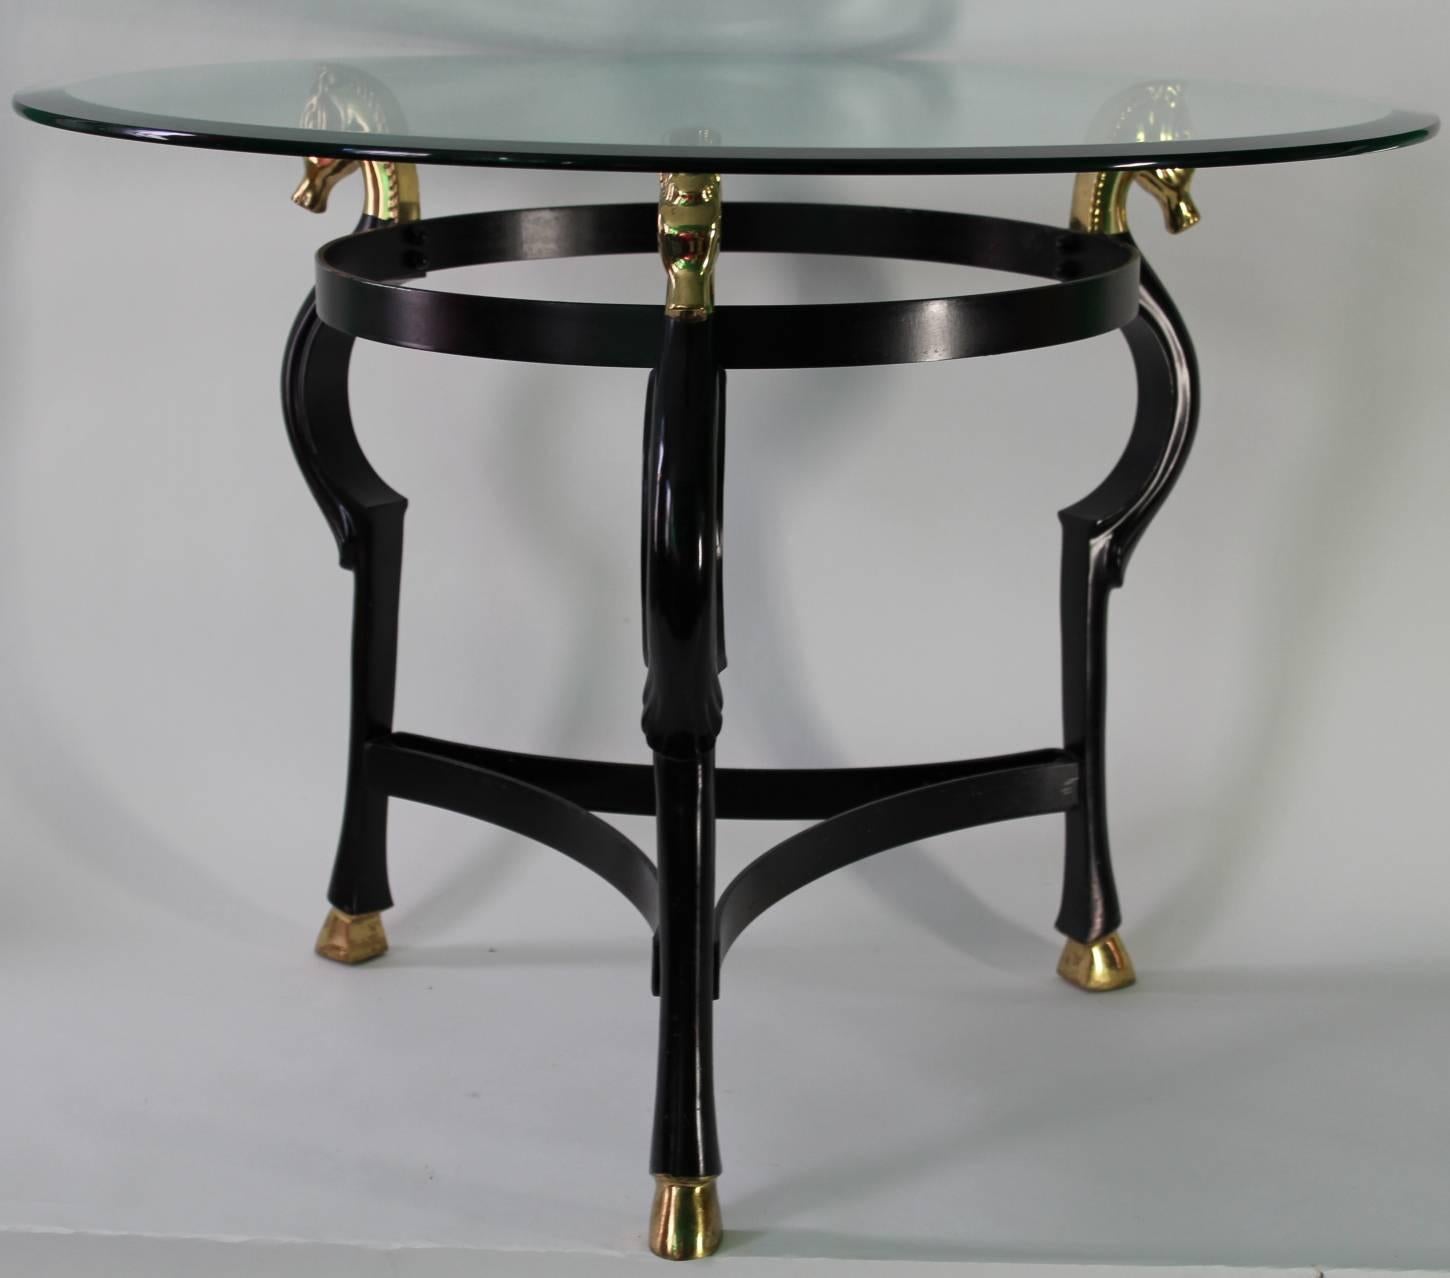 A Mid-Century Modern round end or side table in ebonized brass with seahorse heads and hooves motif and a circular glass top. The piece was made in the 1970s in Italy and is in good vintage condition.